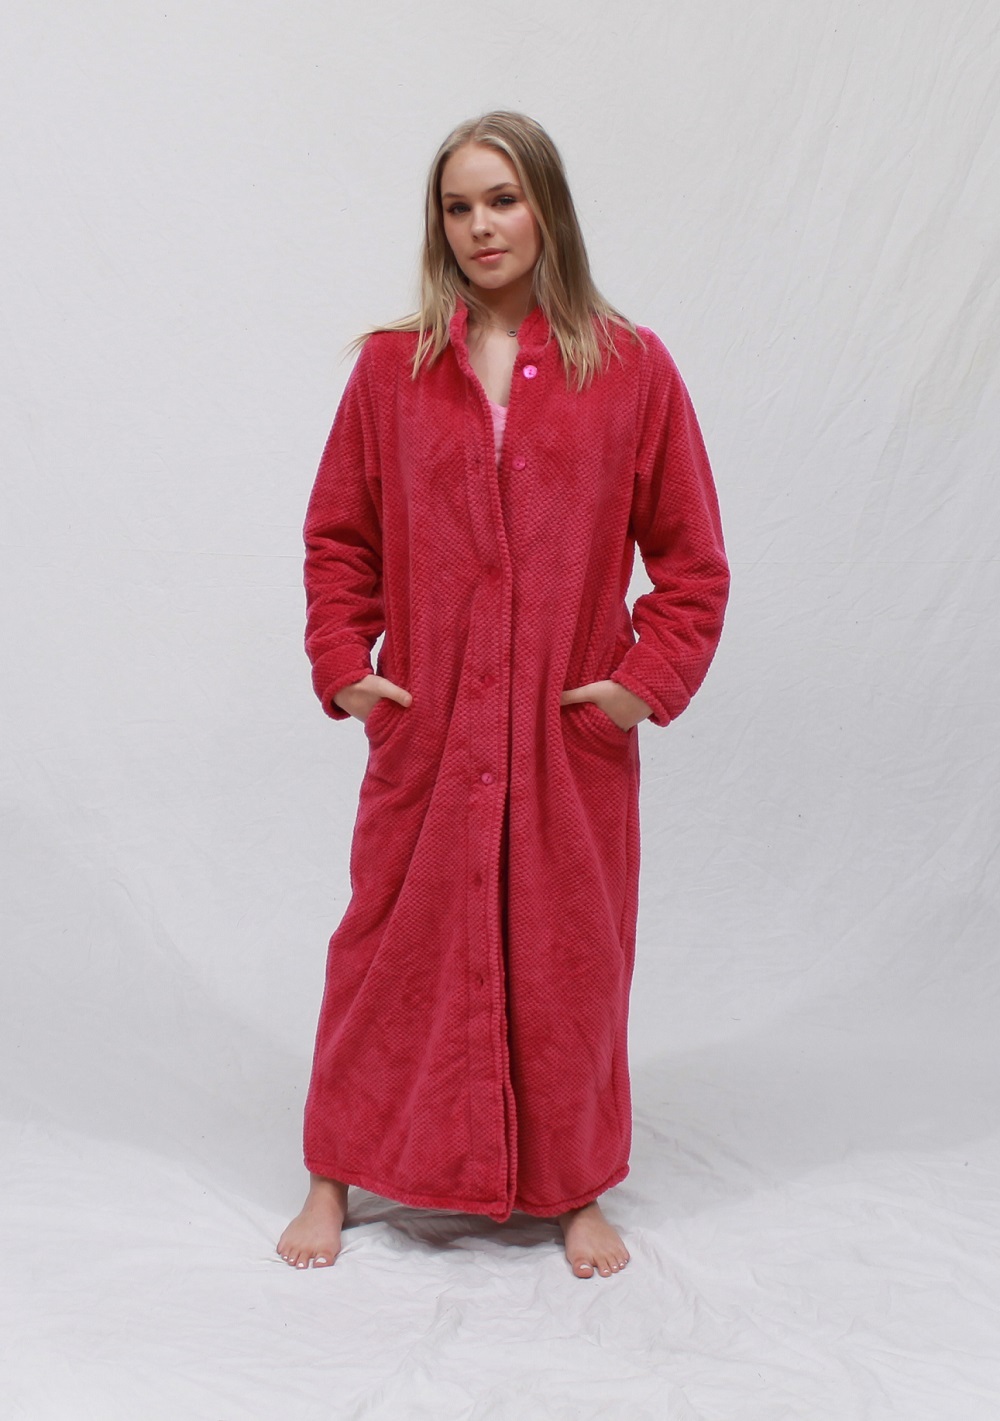 Boux Avenue's Dressing Gowns Selling Every Minute - With Bestseller Selling  Every 10 mins